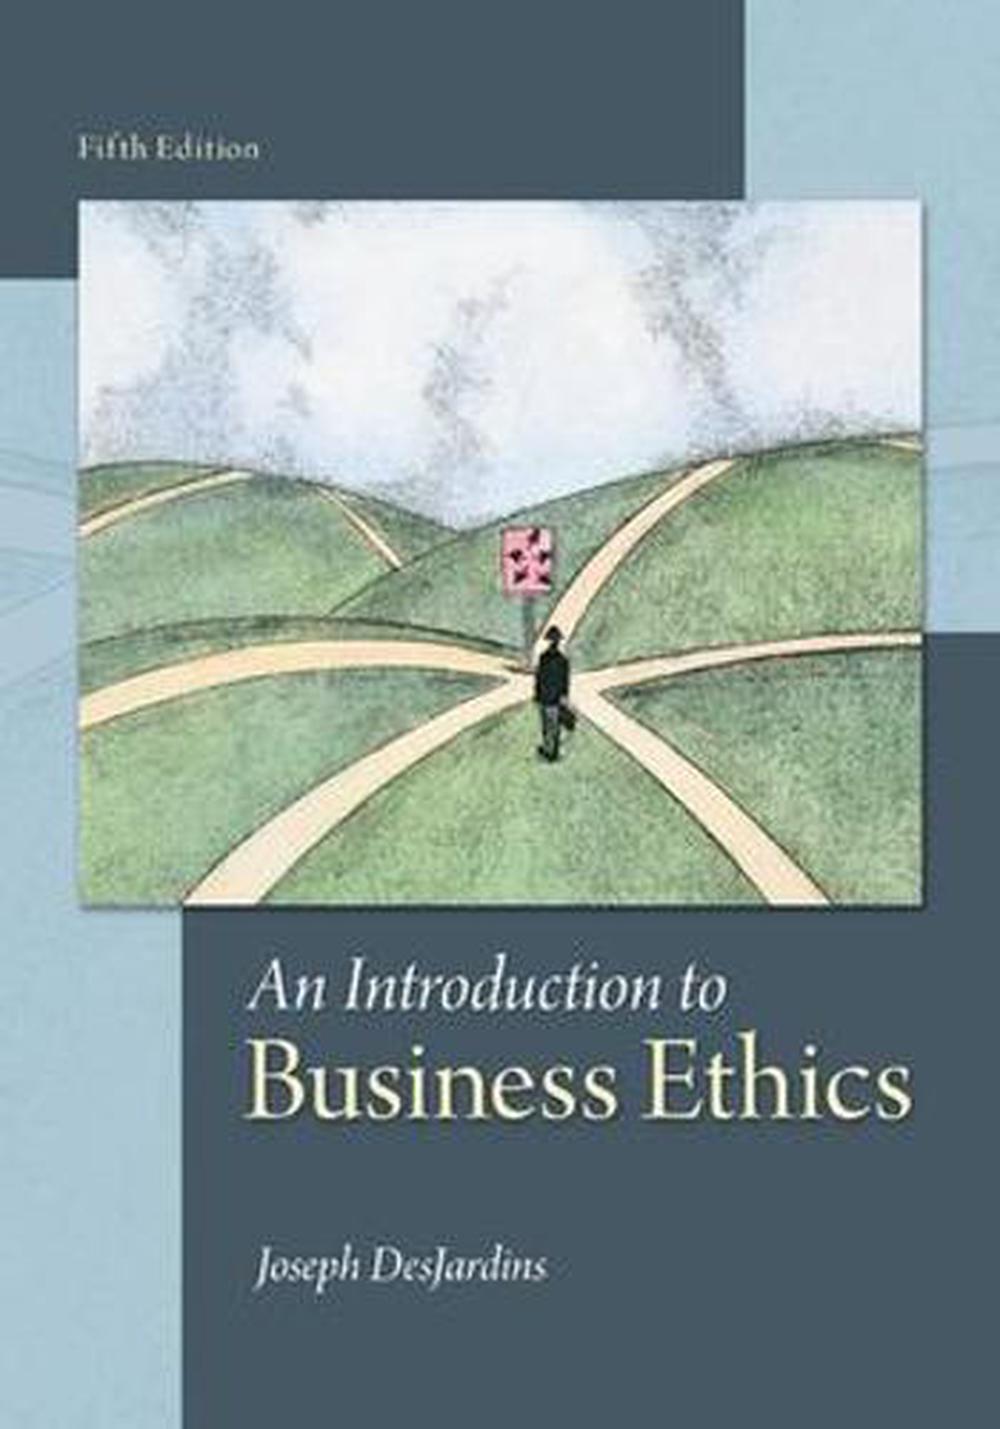 An Introduction to Business Ethics 5th Edition by Joseph R. DesJardins (English) 9780078038327